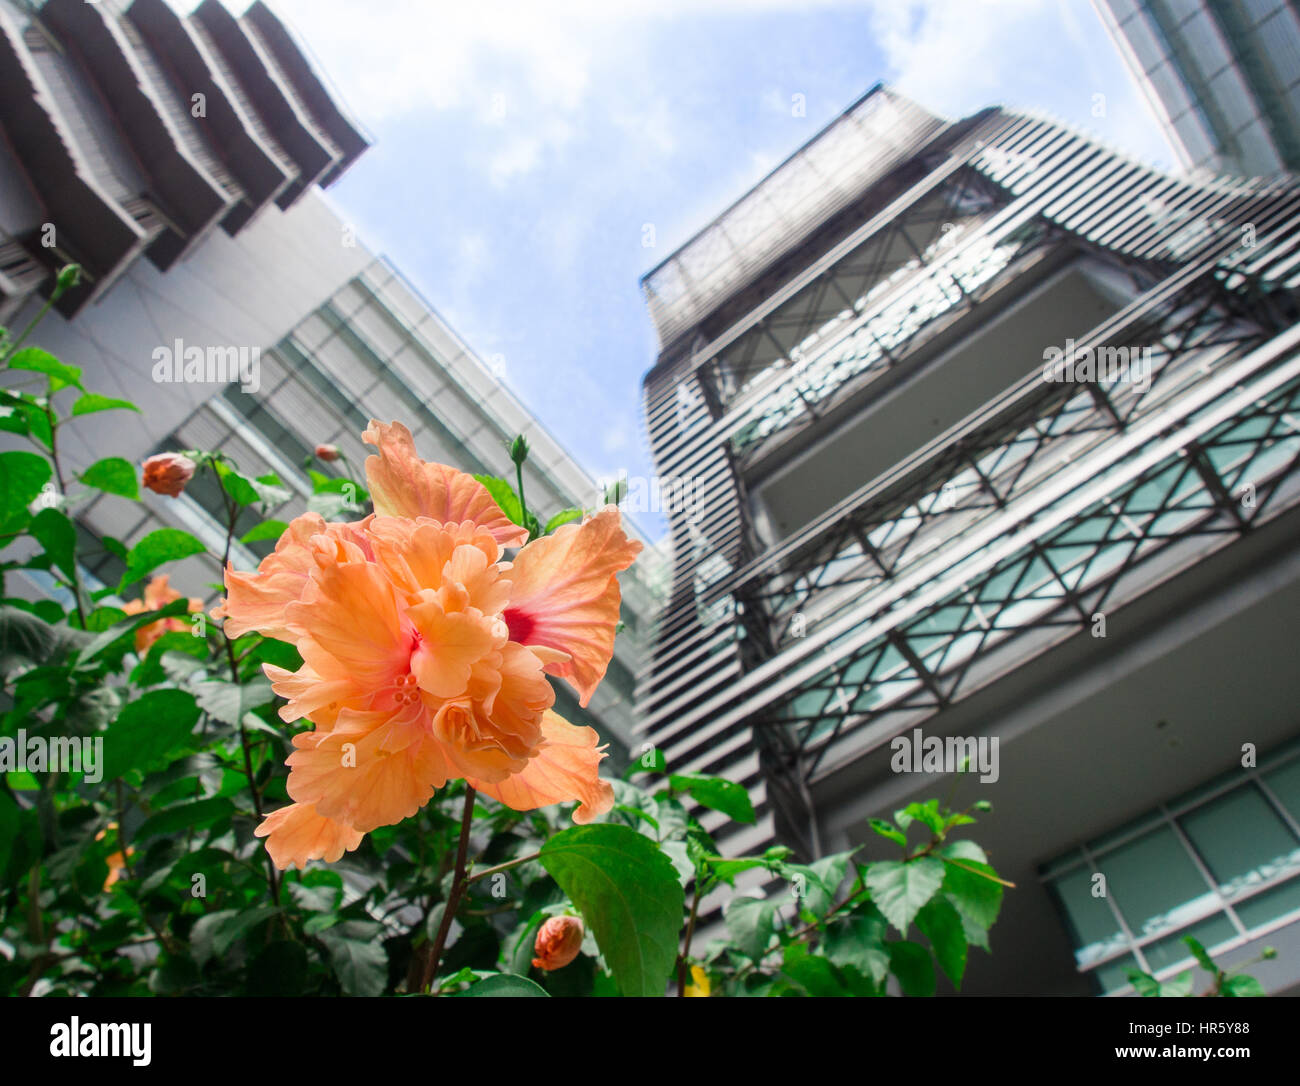 Beautiful peach color flower before a modern building: PATHUM THANI, THAILAND - AUGUST 04, 2016 Stock Photo